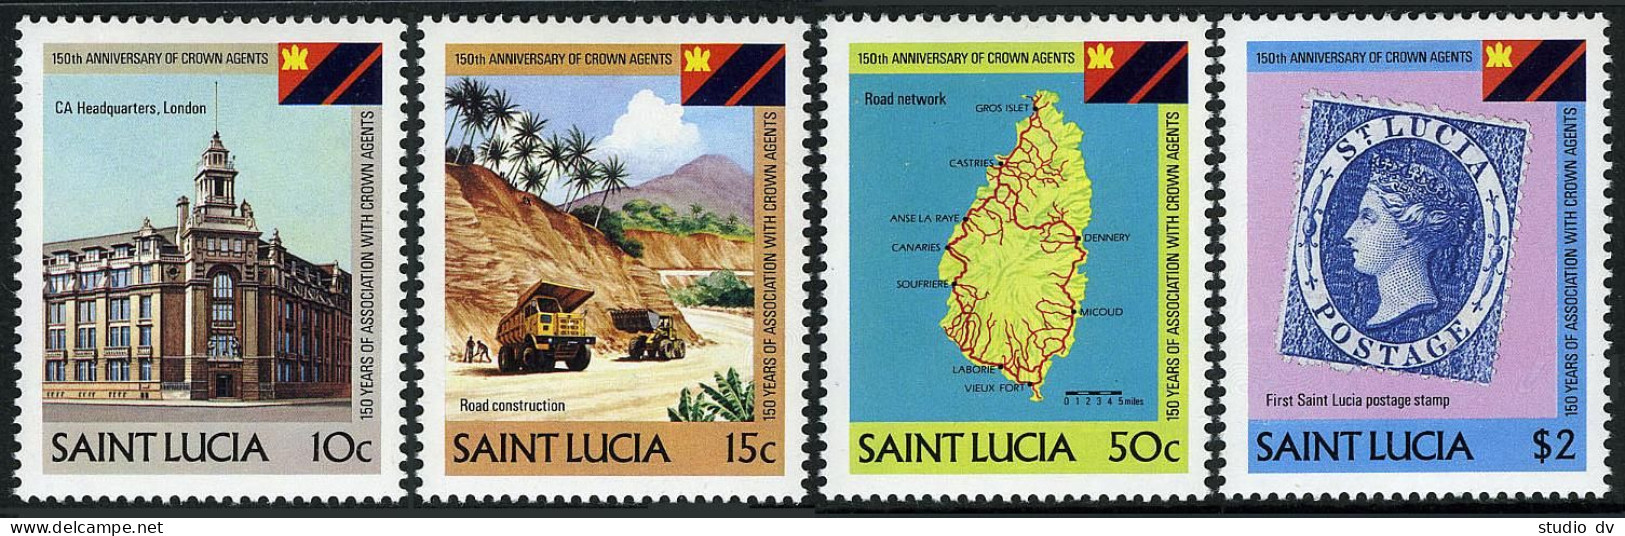 St Lucia 603-606,MNH.Michel 343. Crown Agents,150th Ann.1983.Headquarters,Map, - St.Lucia (1979-...)